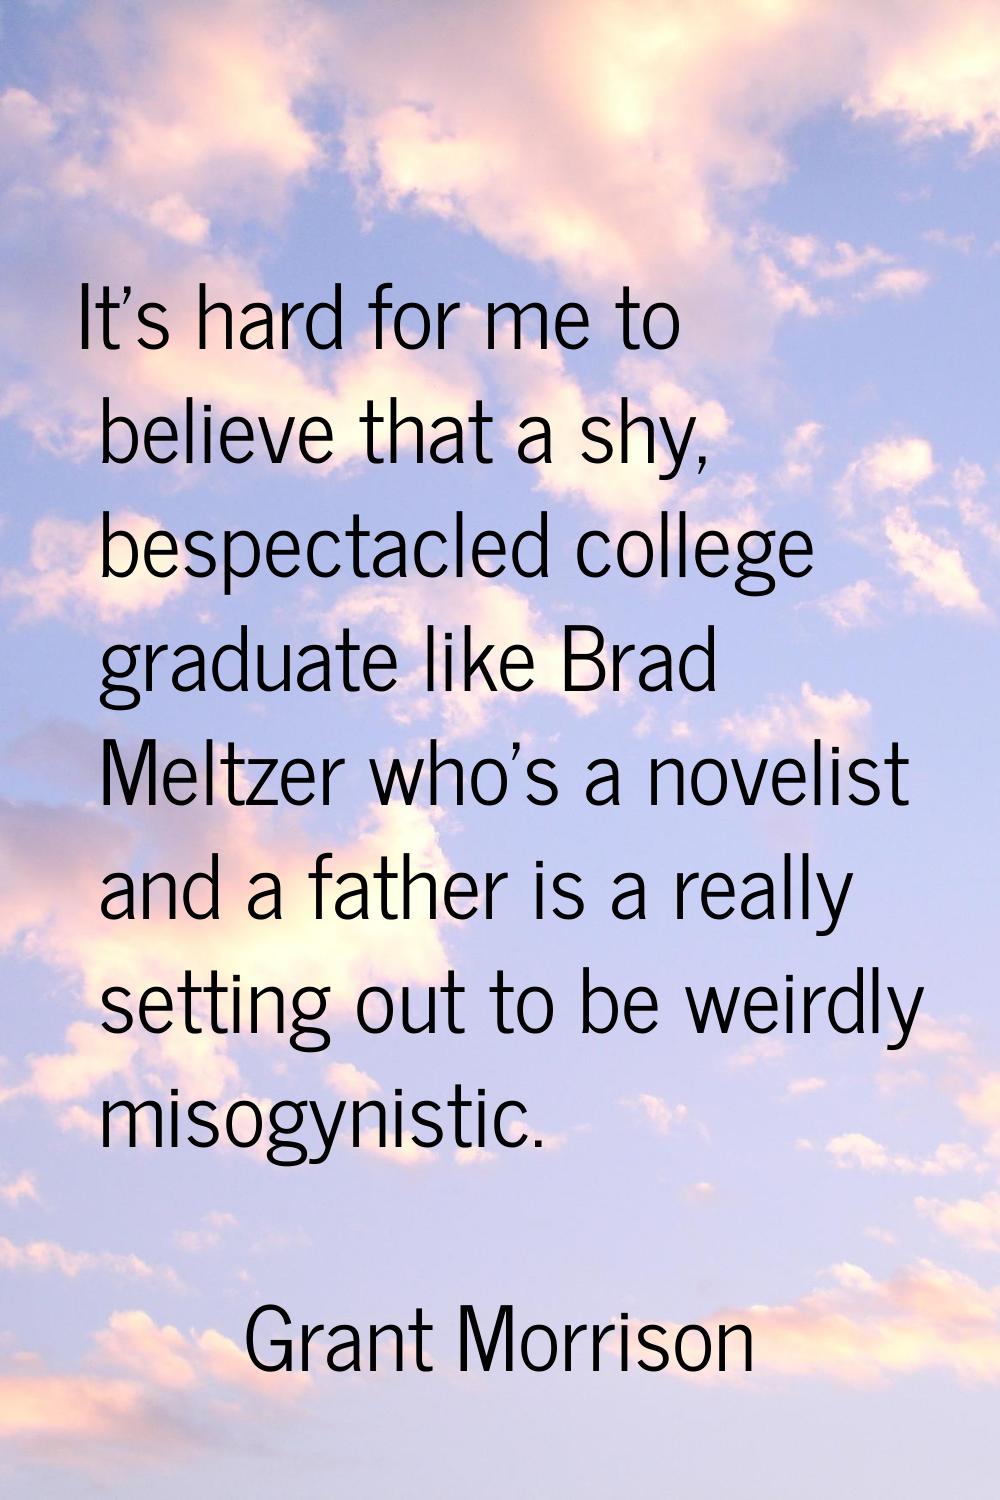 It's hard for me to believe that a shy, bespectacled college graduate like Brad Meltzer who's a nov